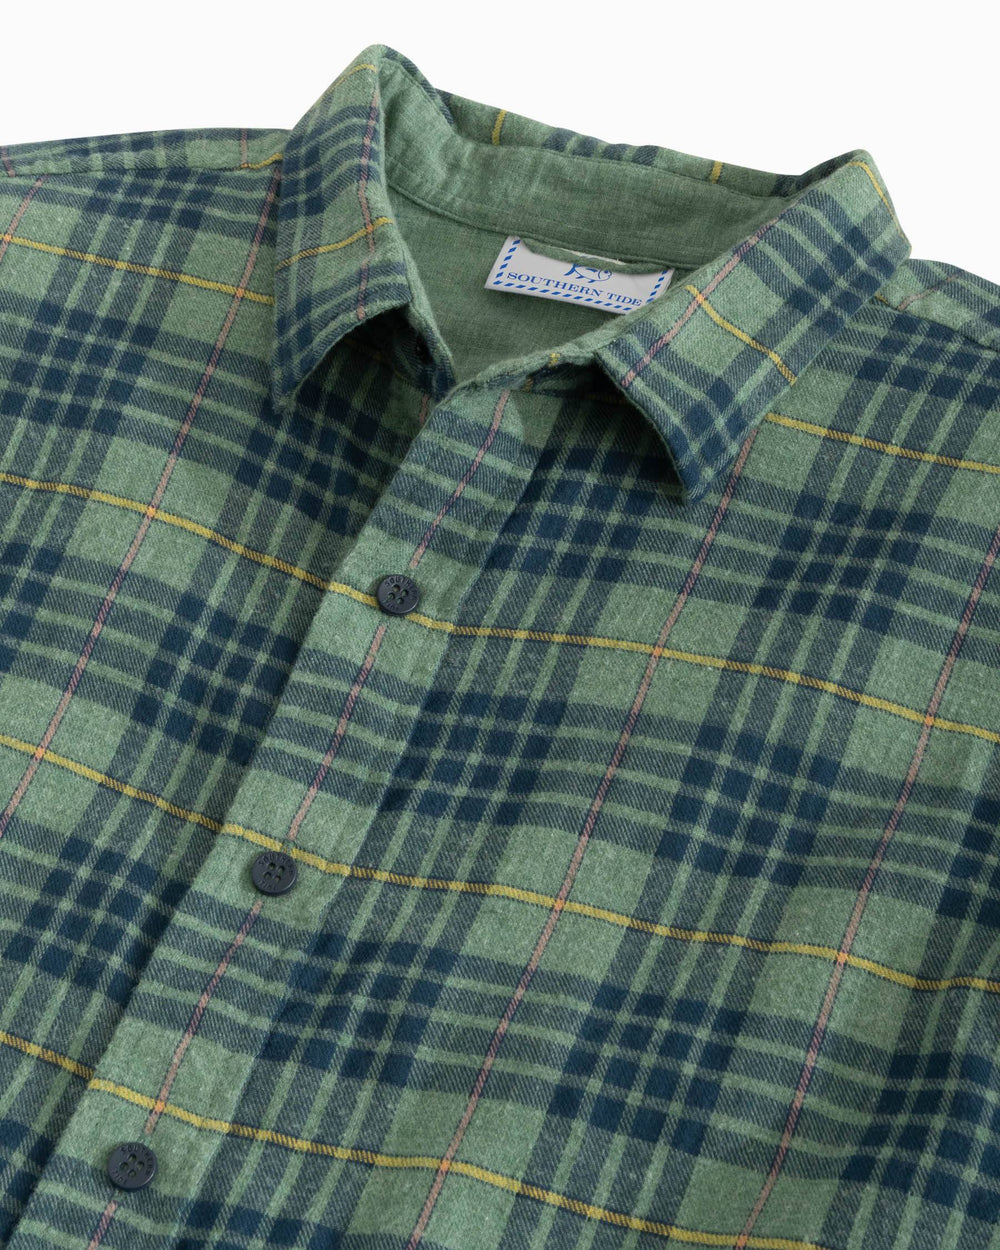 The detail view of the Southern Tide Payton Heather Reversible Plaid Sport Shirt by Southern Tide - Heather Dark Ivy